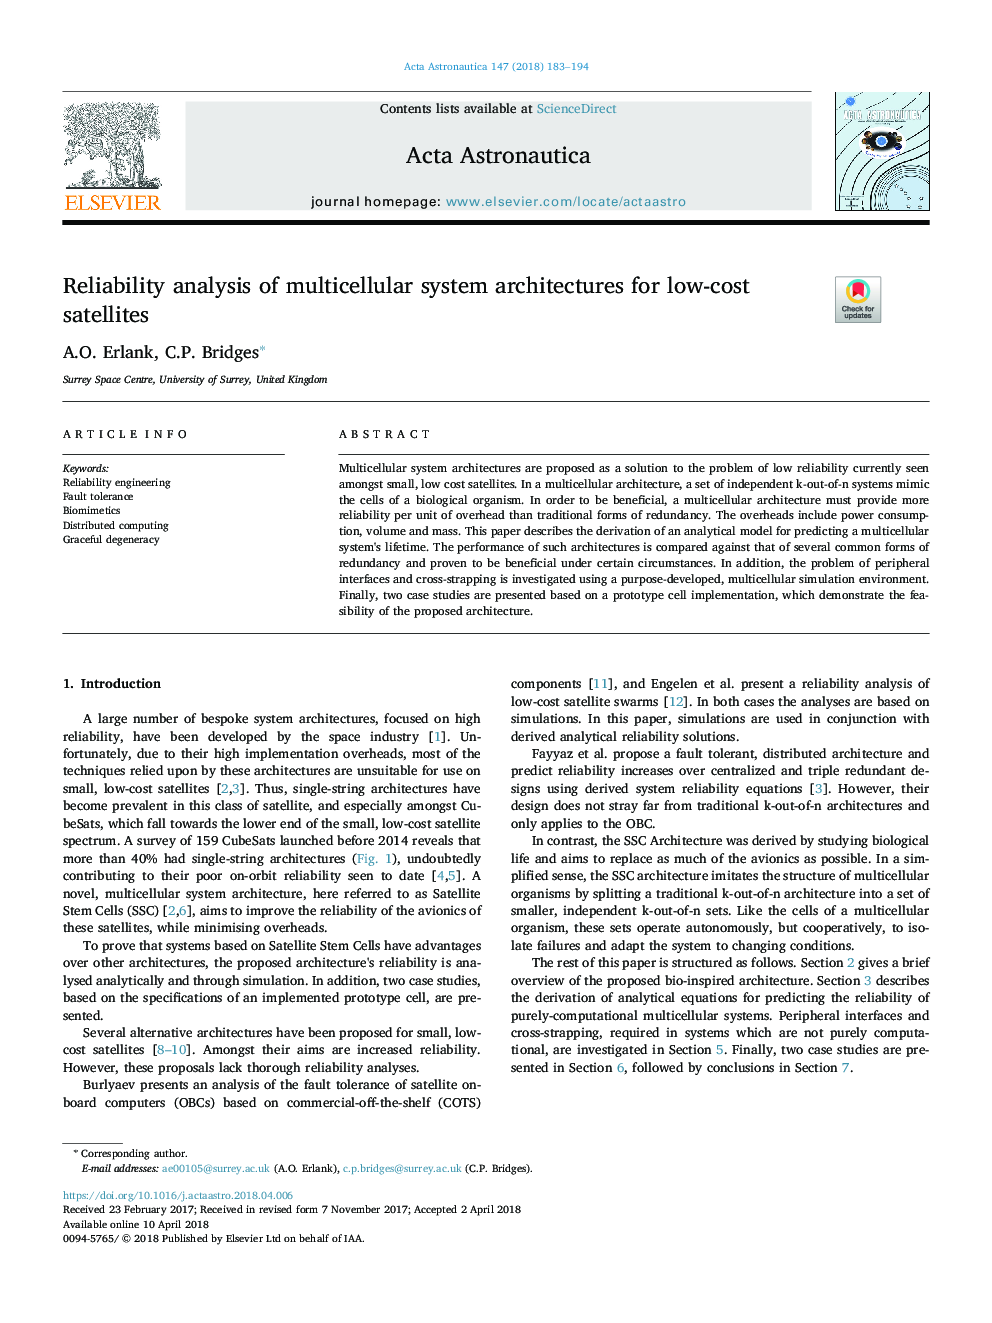 Reliability analysis of multicellular system architectures for low-cost satellites